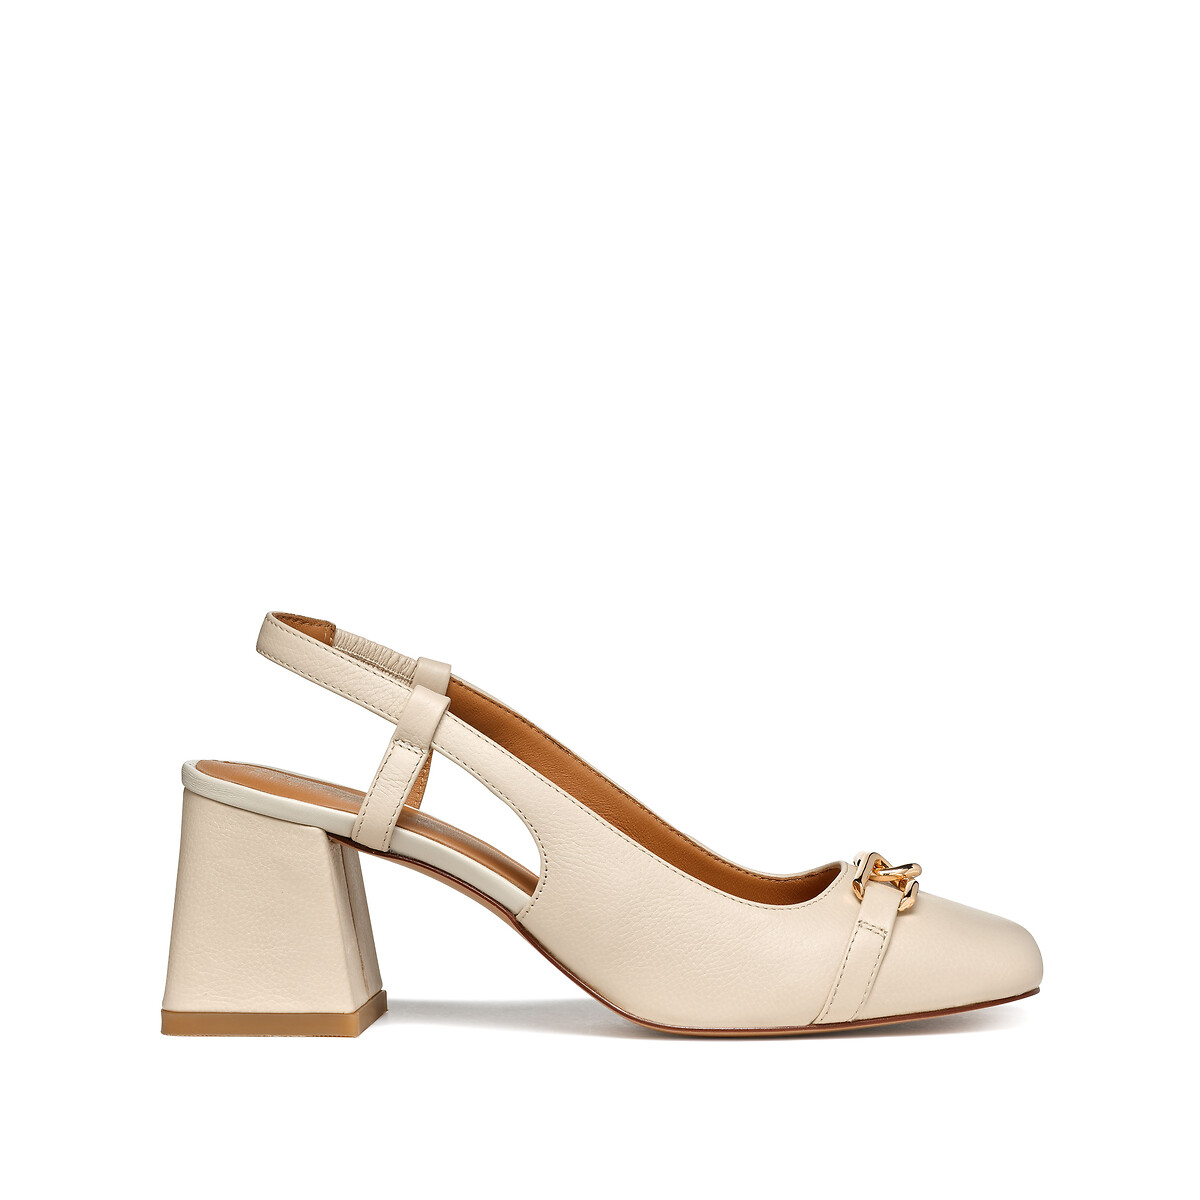 Image of Coronilla Leather Slingback Heels with Square Toe